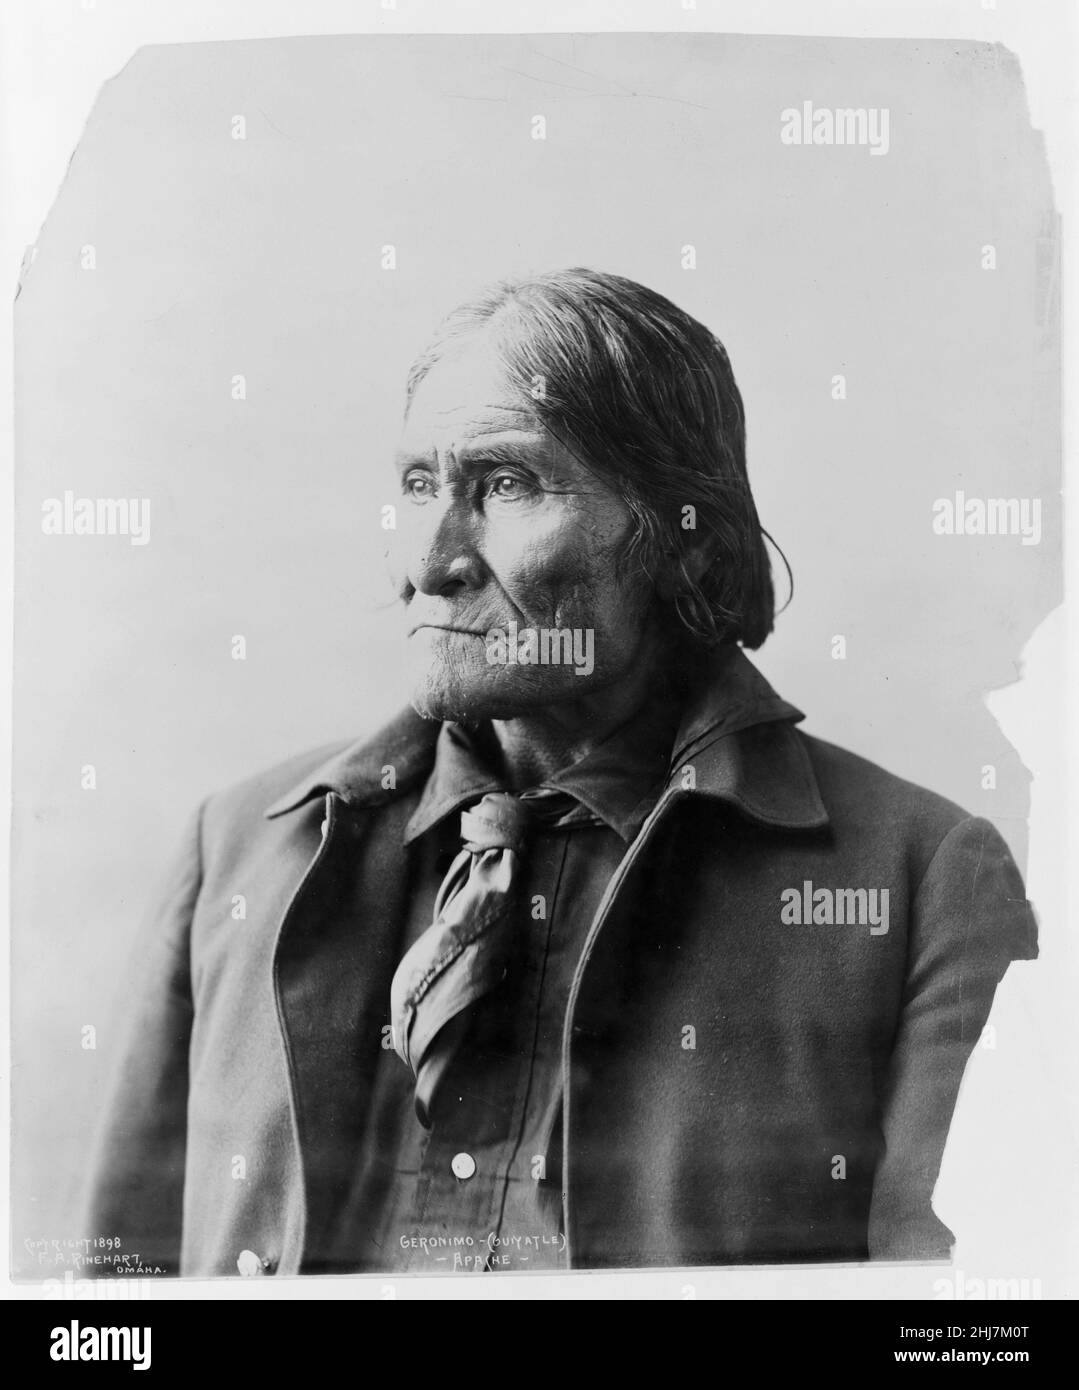 Geronimo (Guiyatle) - Apache - Antique and vintage photo - Native american / Indian / American Indian. 1898. Stock Photo